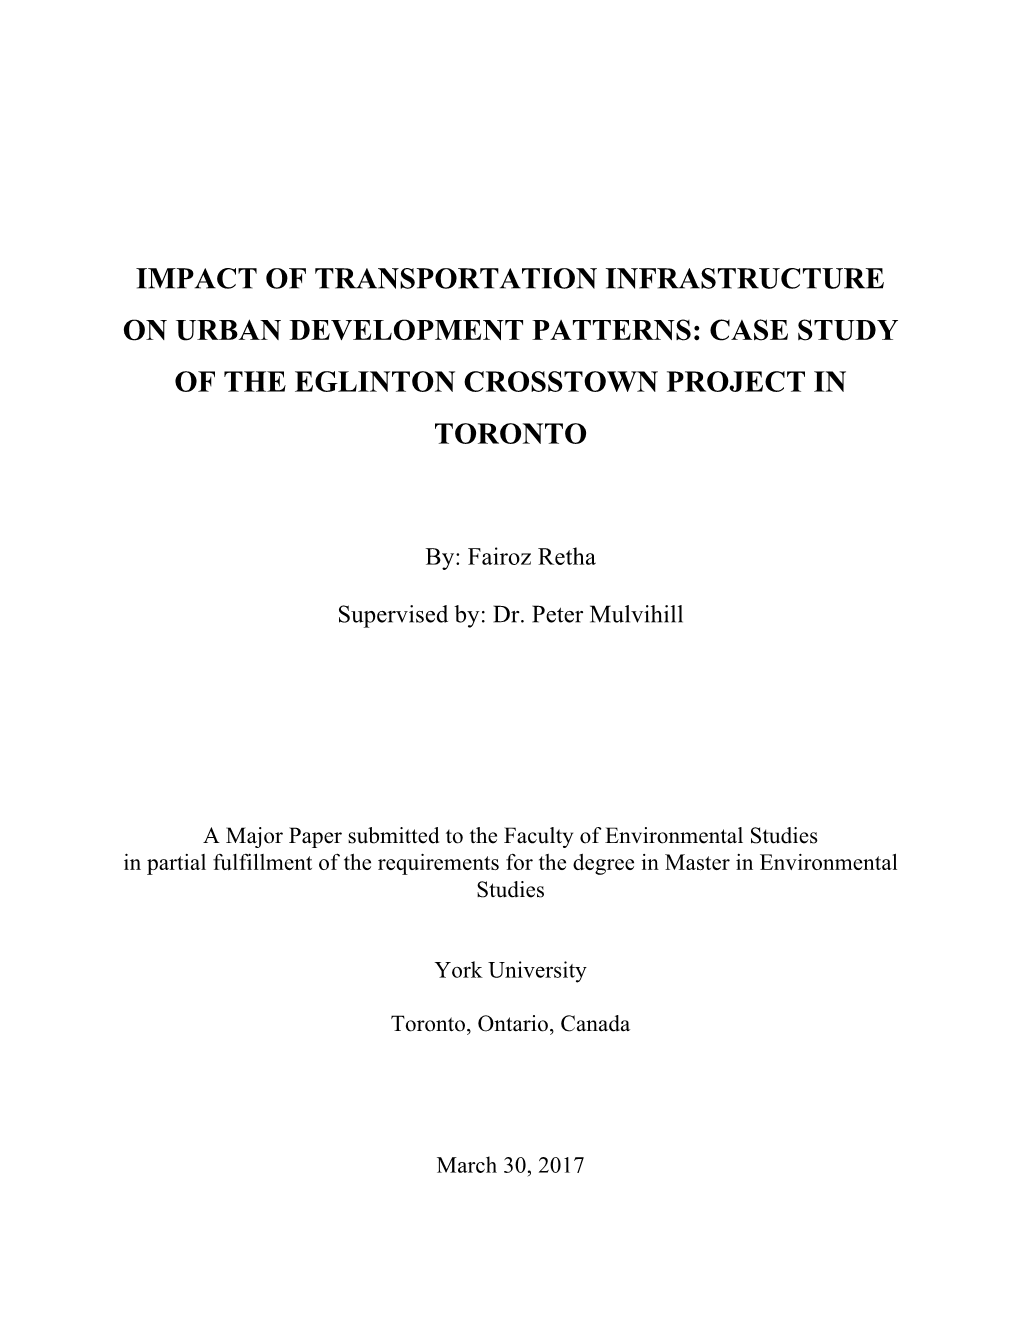 Impact of Transportation Infrastructure on Urban Development Patterns: Case Study of the Eglinton Crosstown Project in Toronto